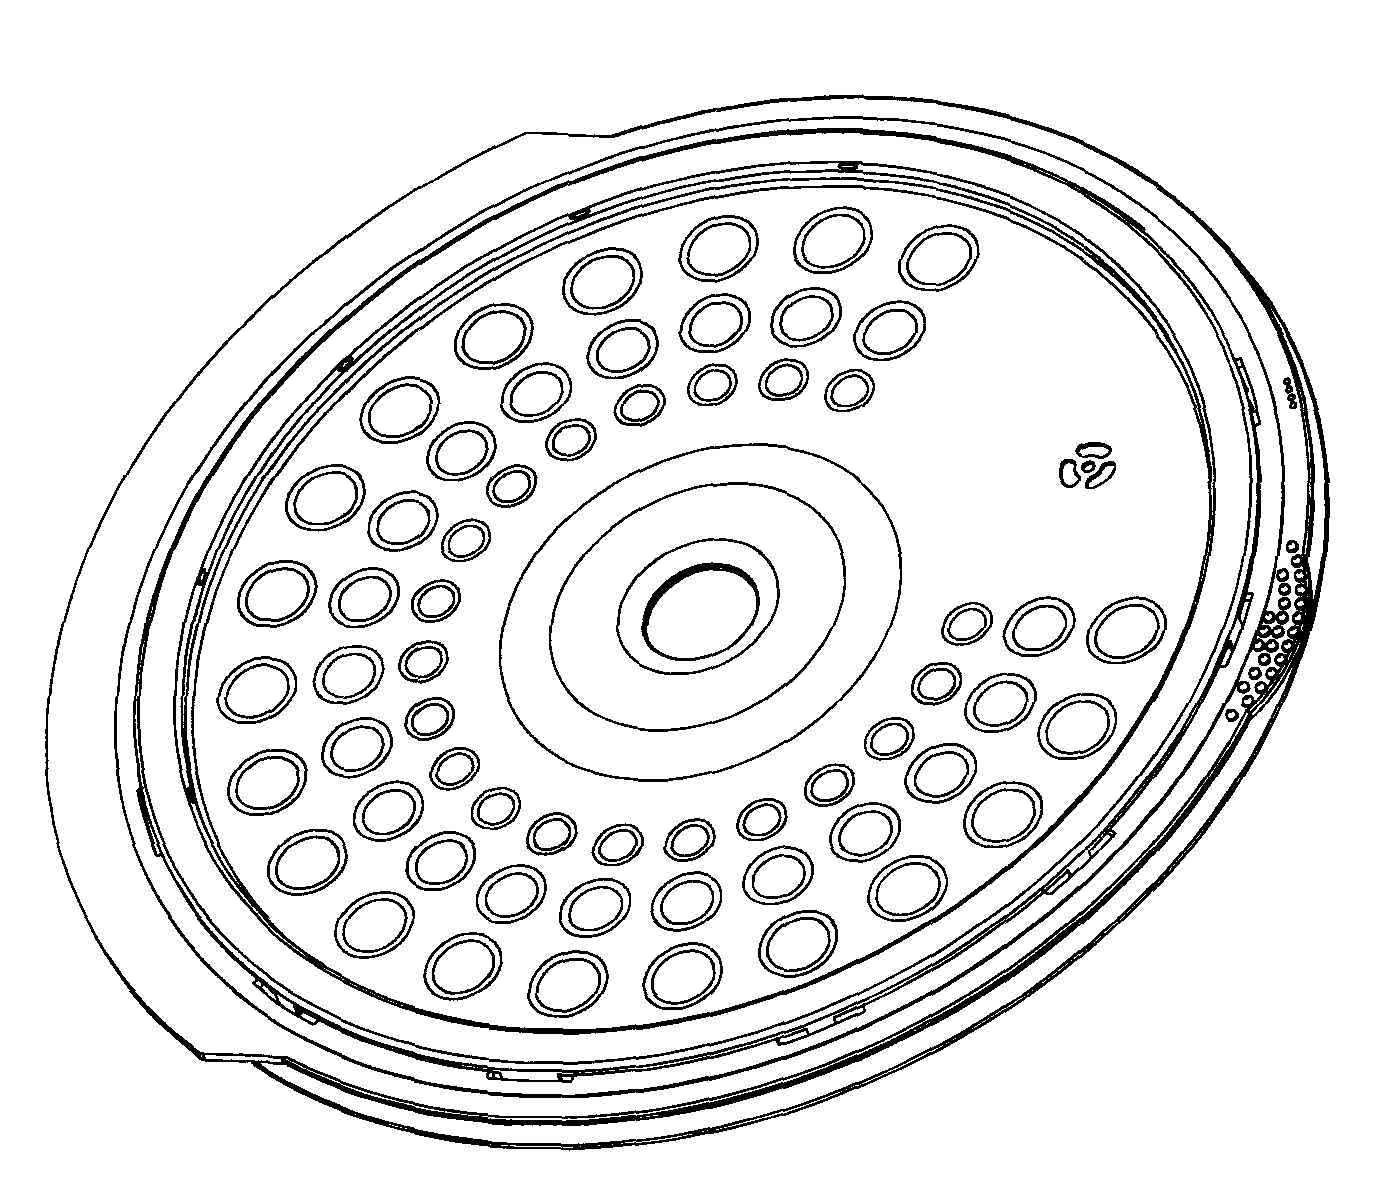 Rice cover sealing plate device capable of being rapidly detached